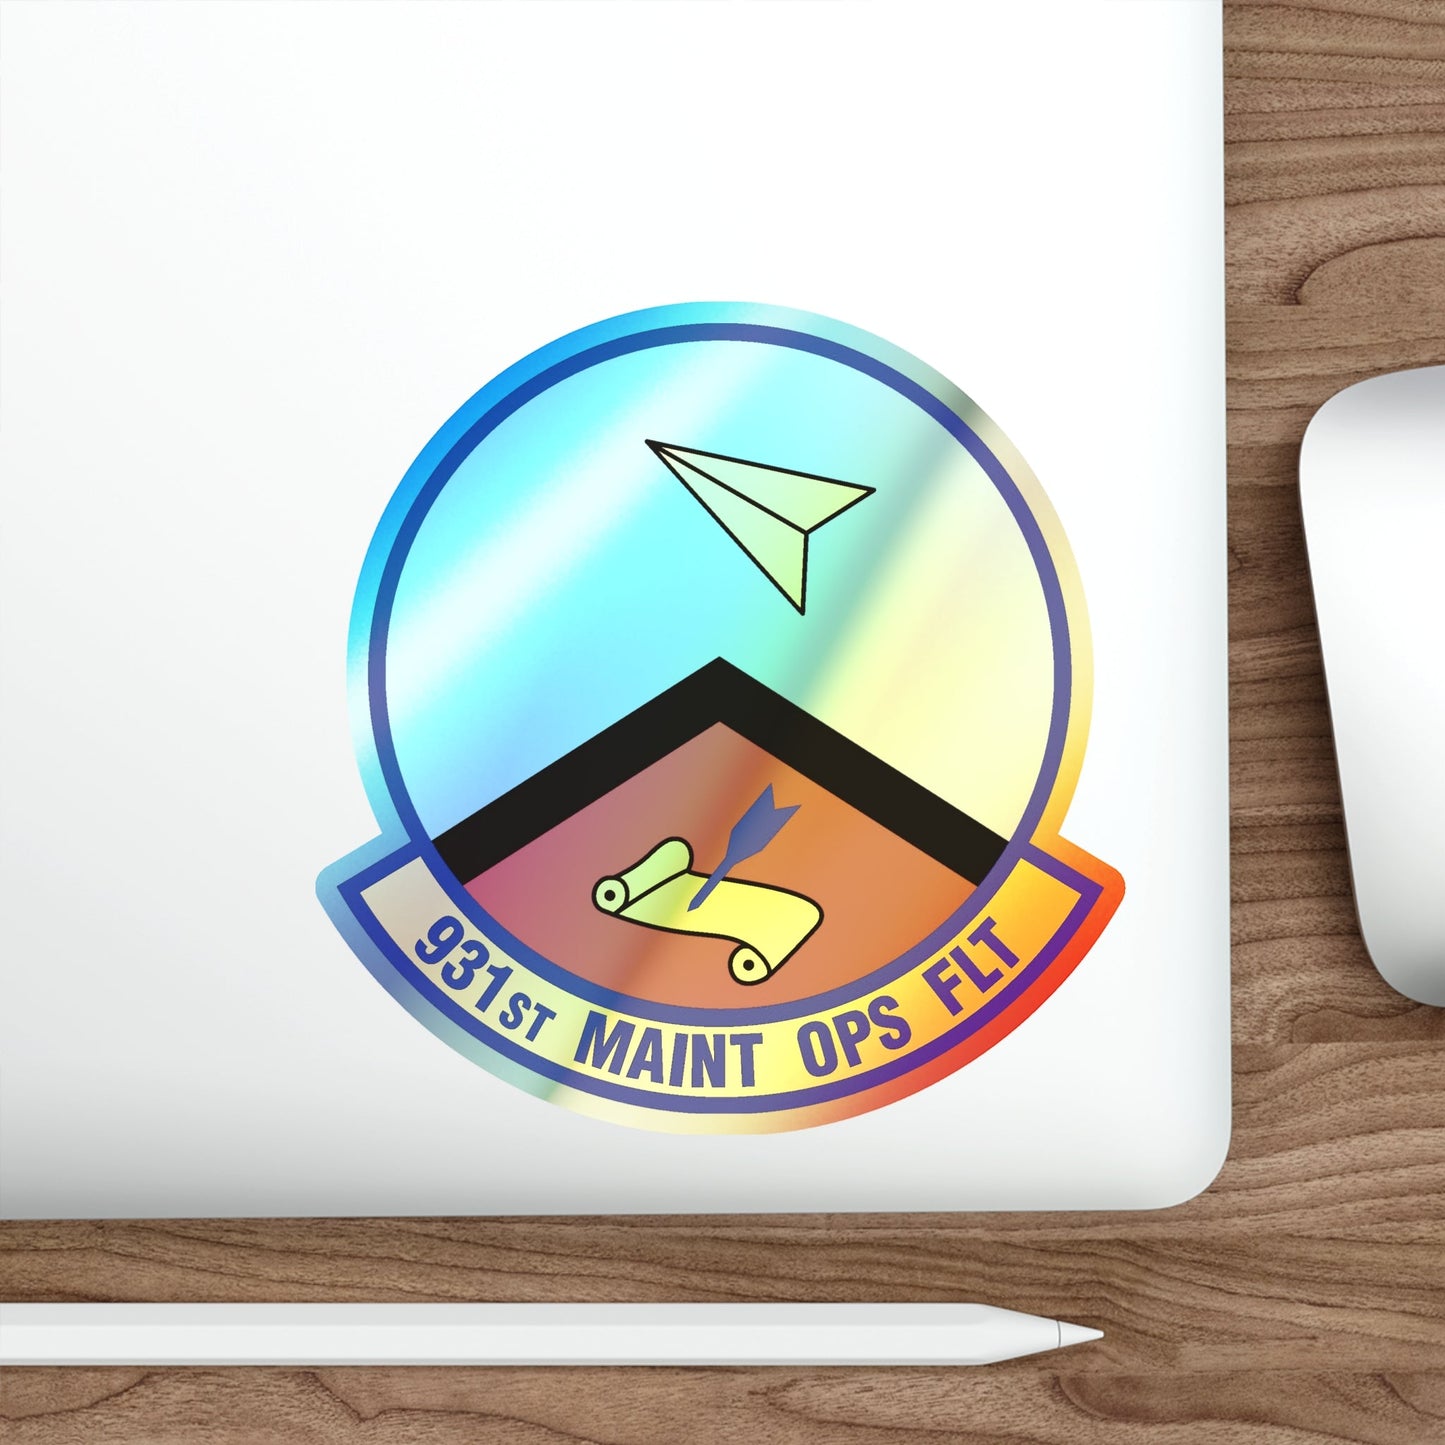 931st Maintenance Operations Flight (U.S. Air Force) Holographic STICKER Die-Cut Vinyl Decal-The Sticker Space